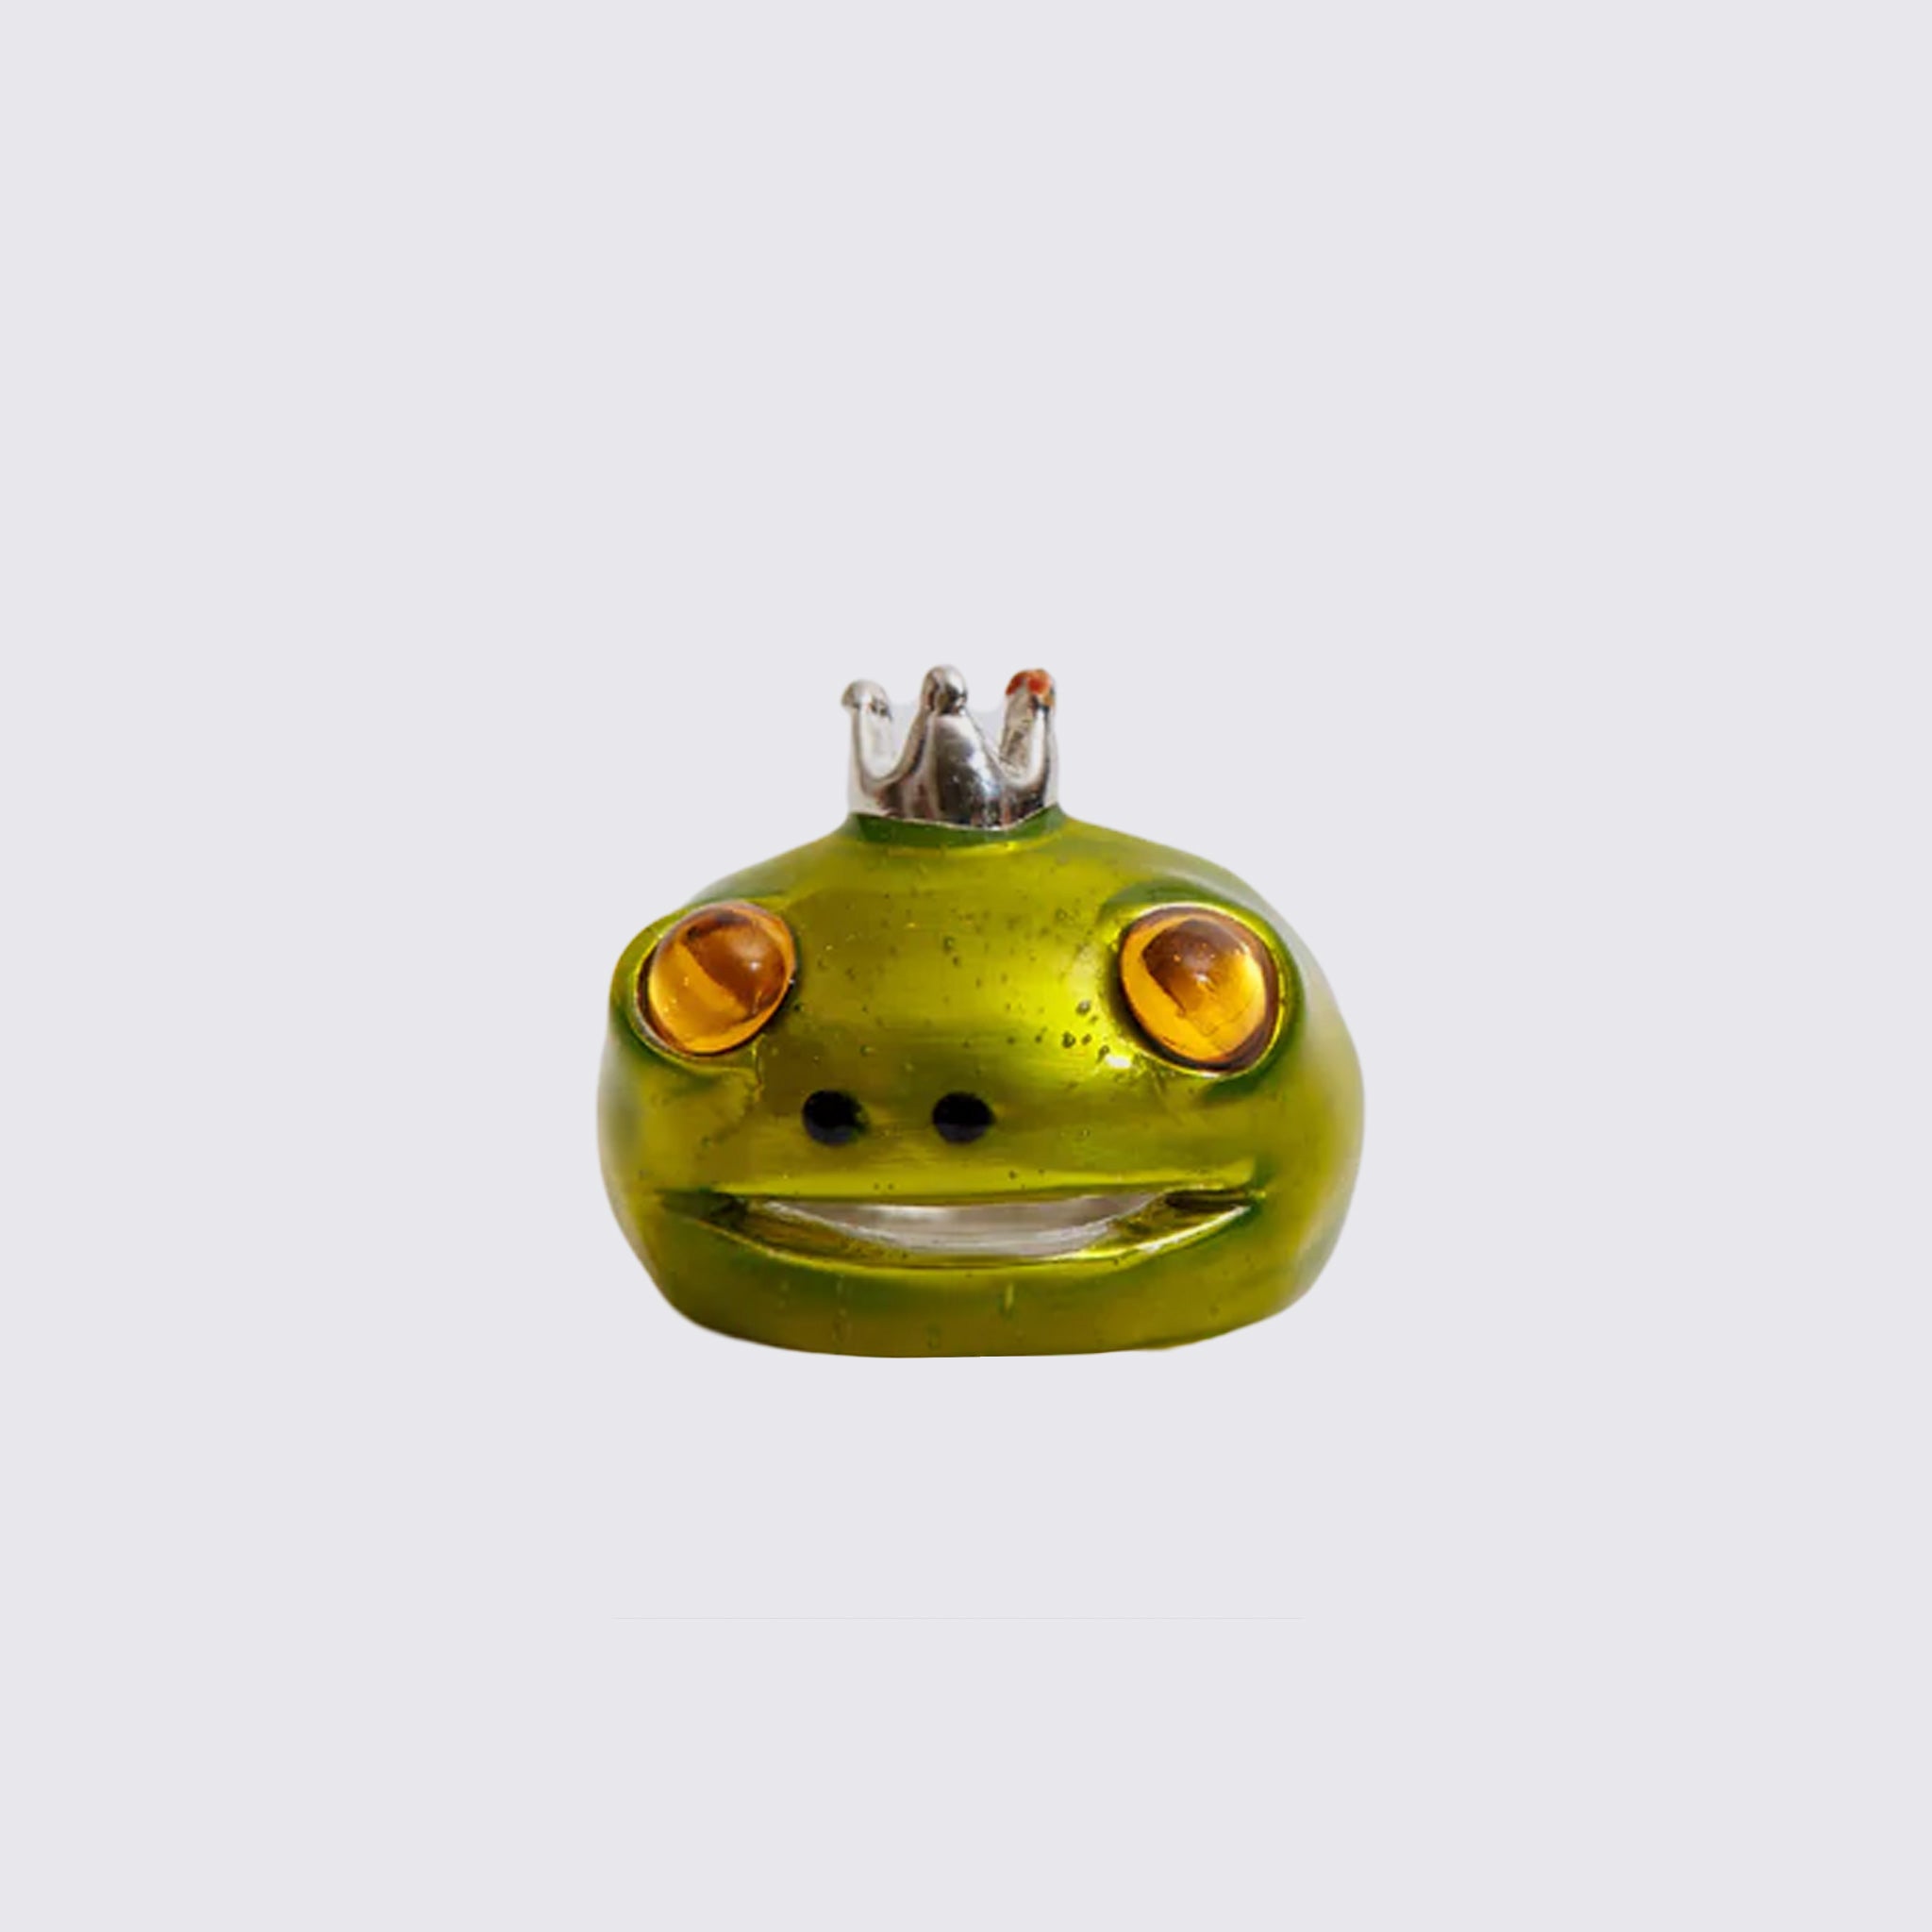 The Frog Prince Ring, a recycled pewter ring shaped like a frog's head wearing a tiny silver crown, hand painted in lime metallic green with golden glass eyes.